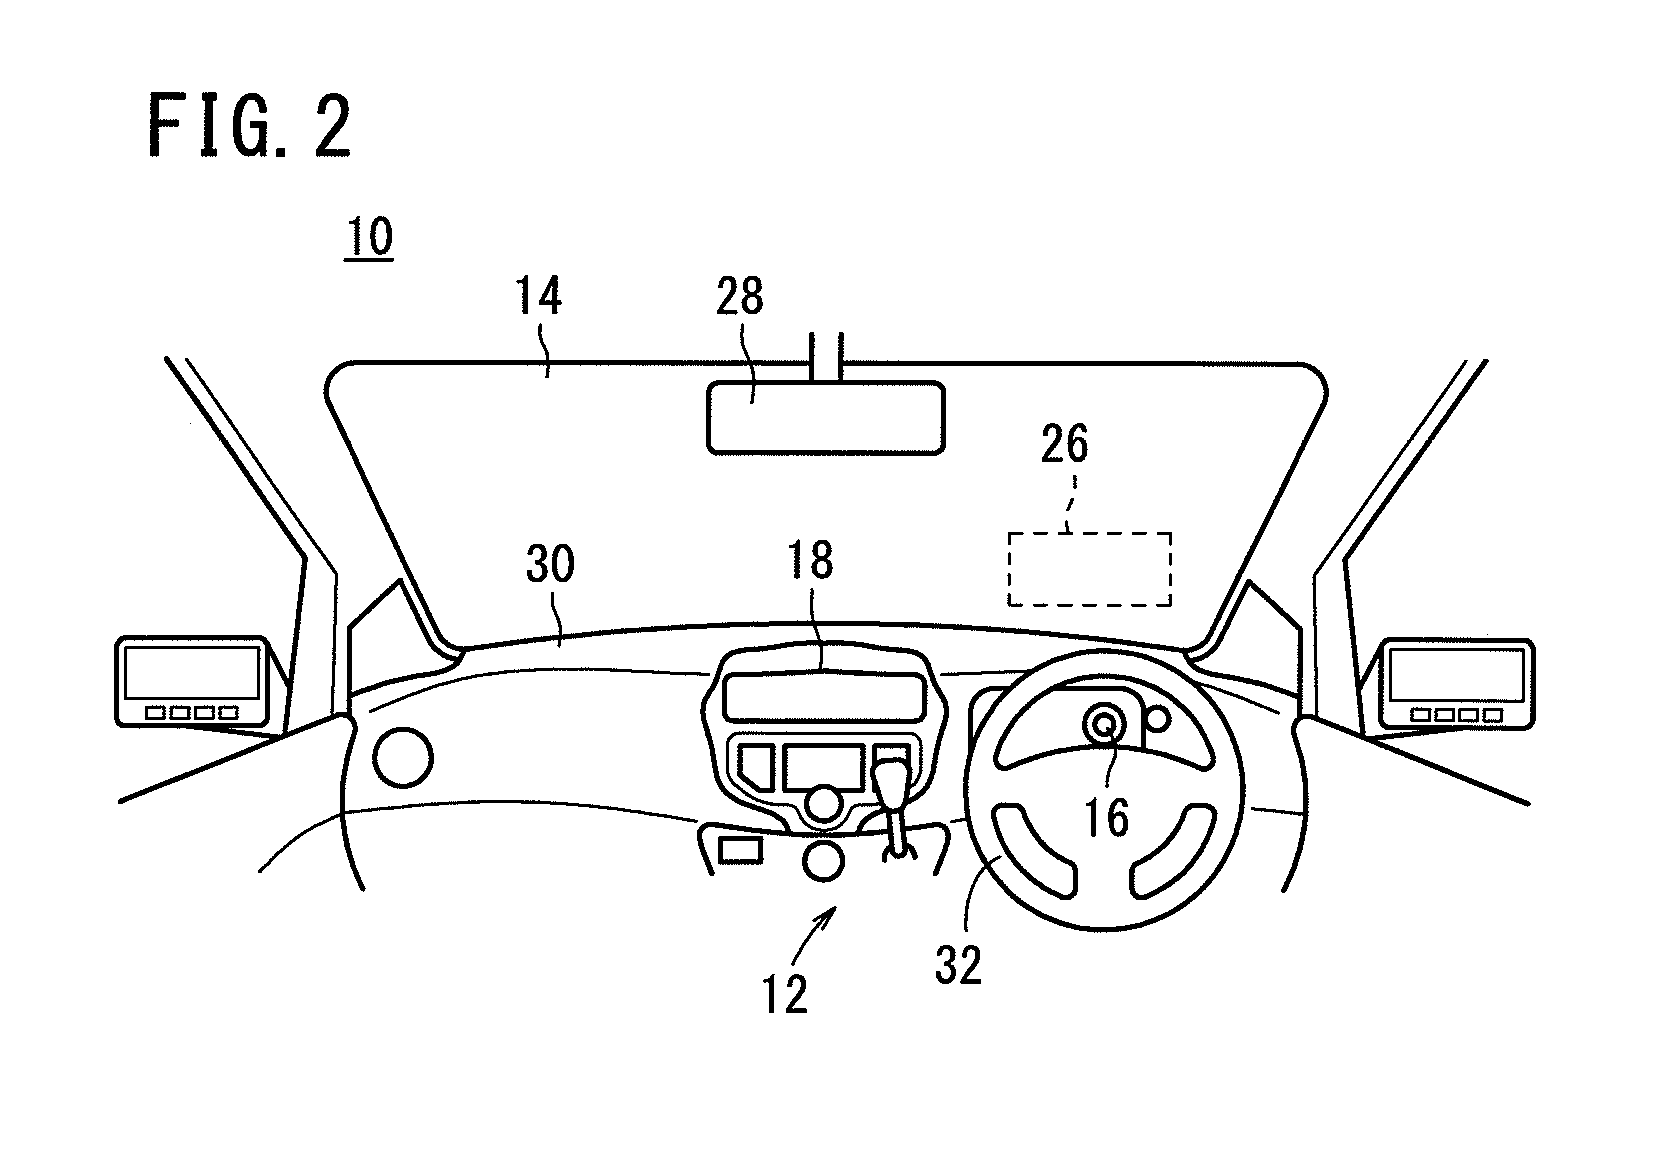 Visually-distracted-driving detection device